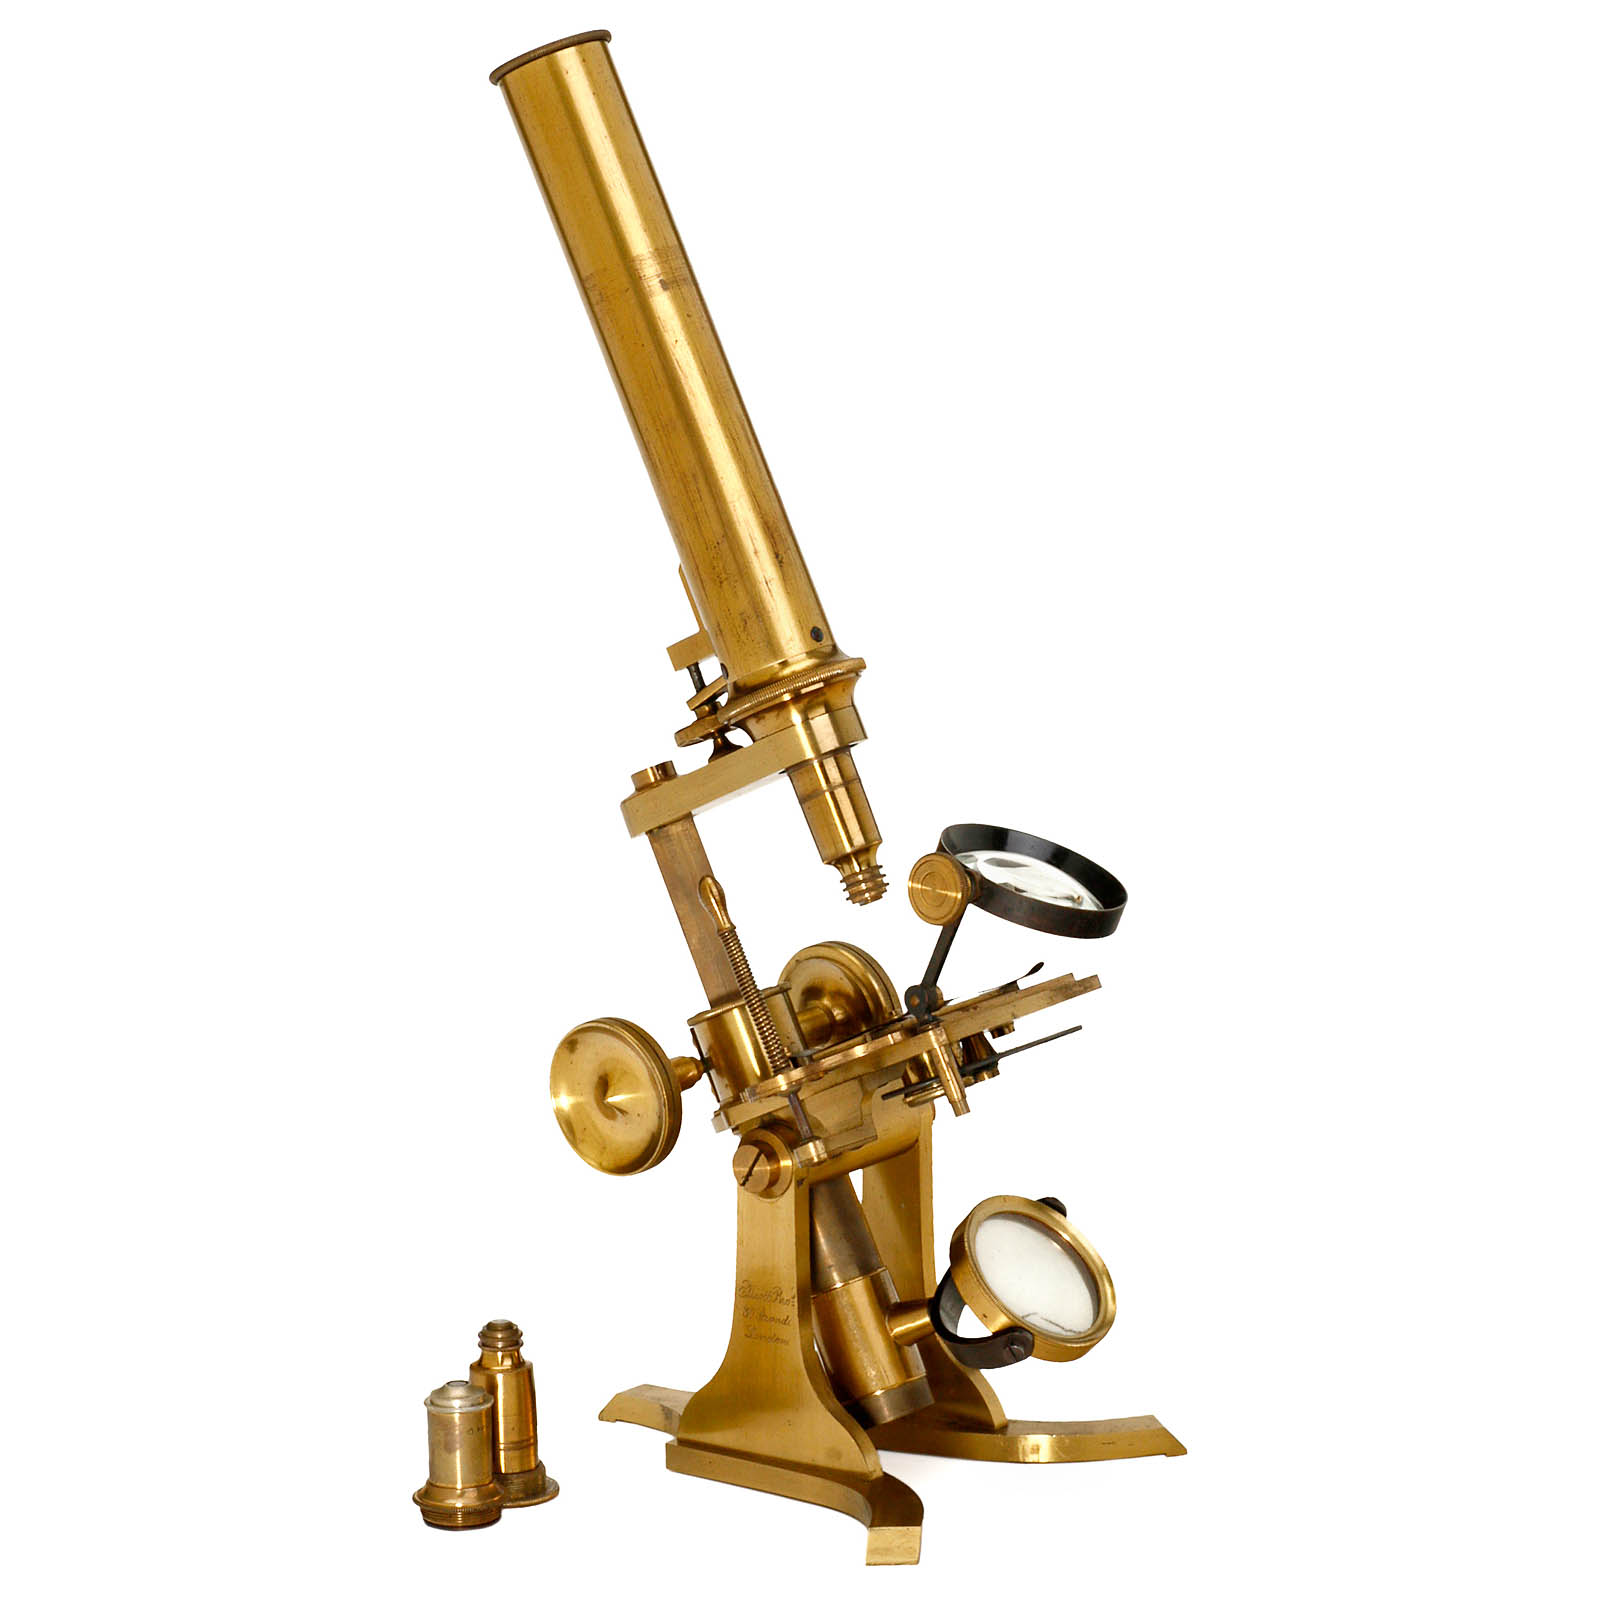 English Compound Microscope by Elliott Bros., c. 1860
Claw-footed base with 2 uprights, 1 side